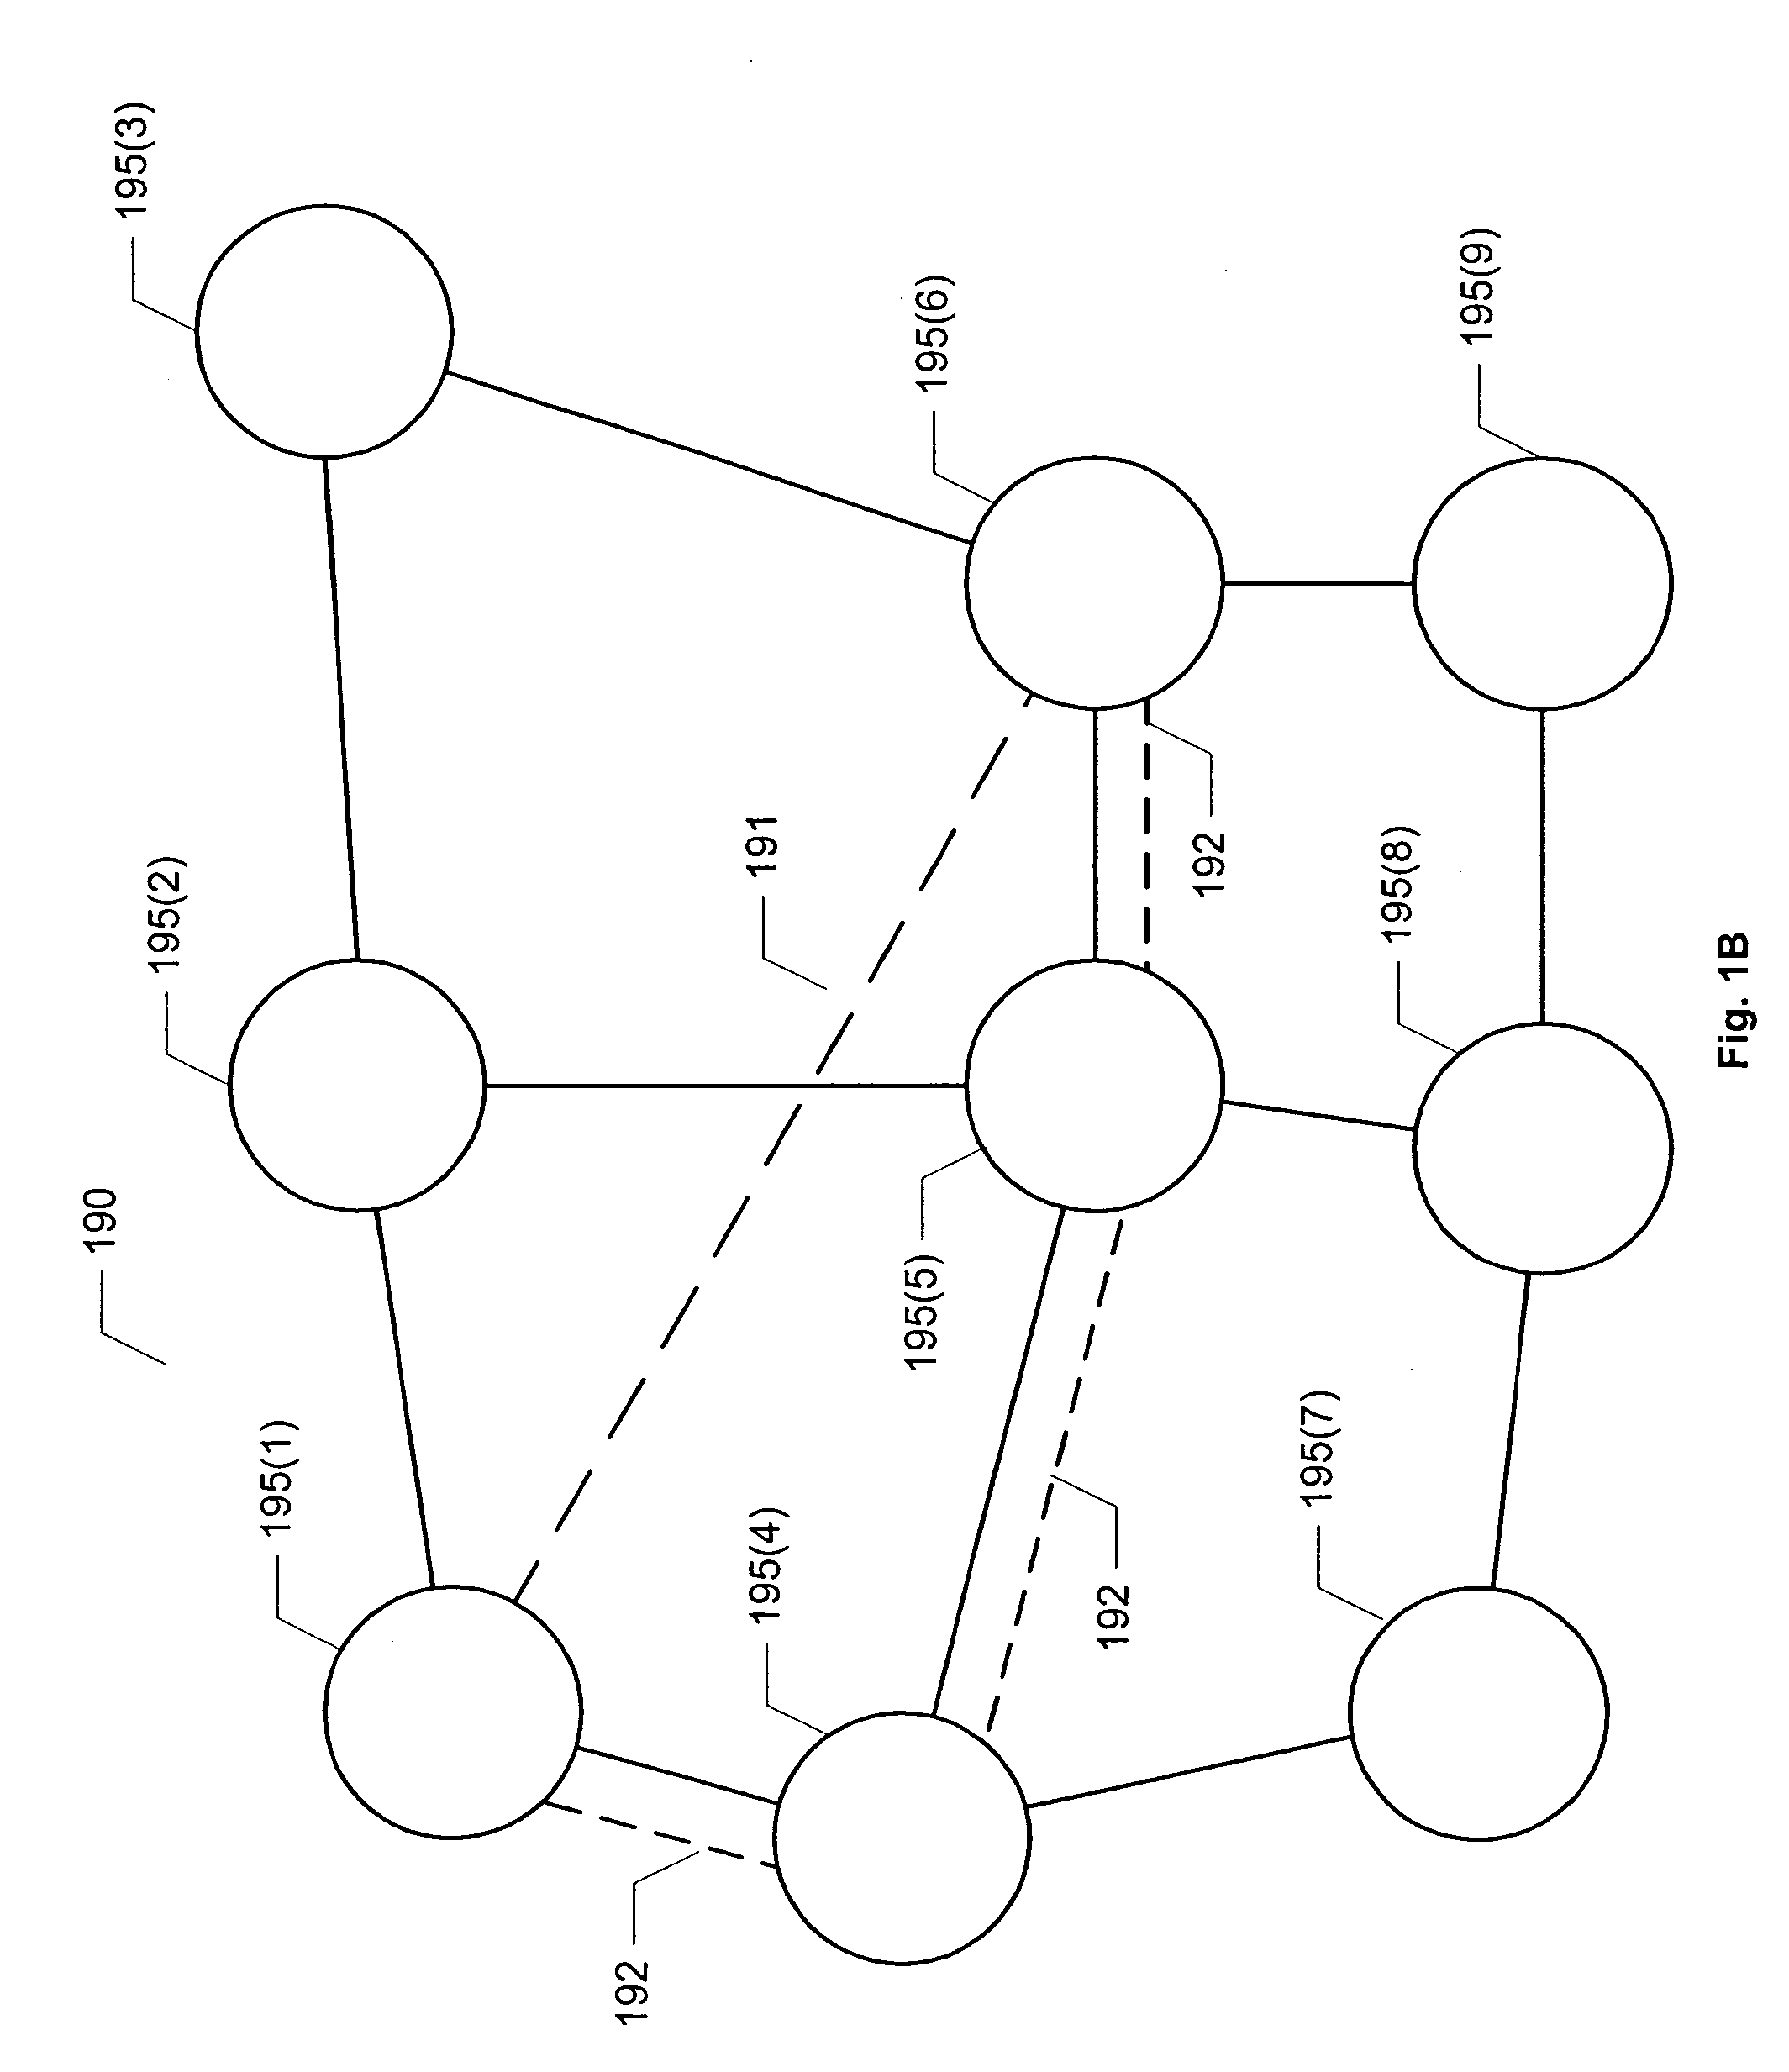 Method of providing network services